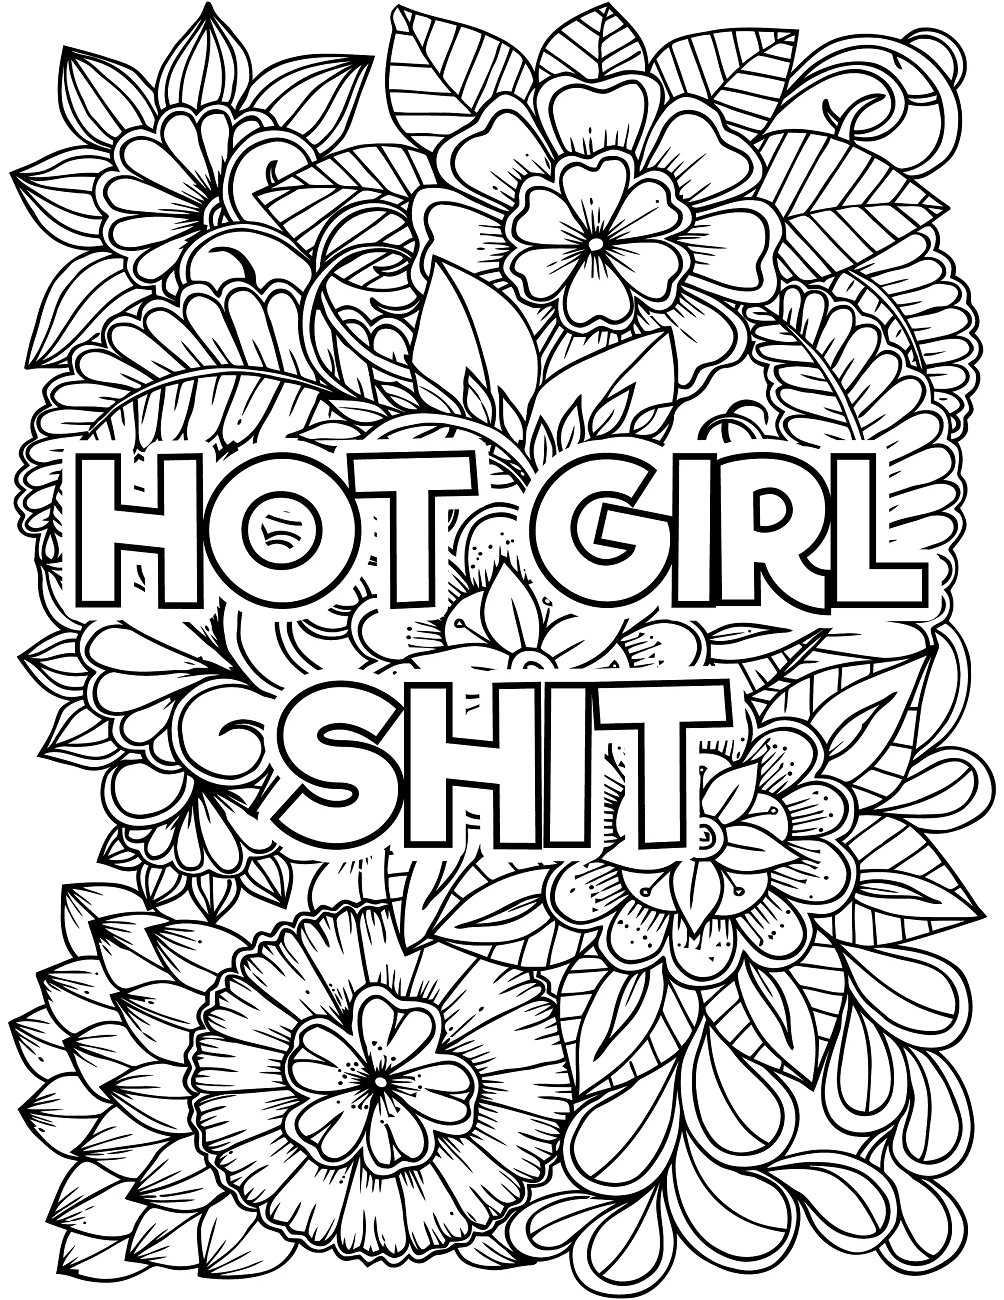 Swear Word to Print Coloring Pages   Swear Word Coloring Pages ...